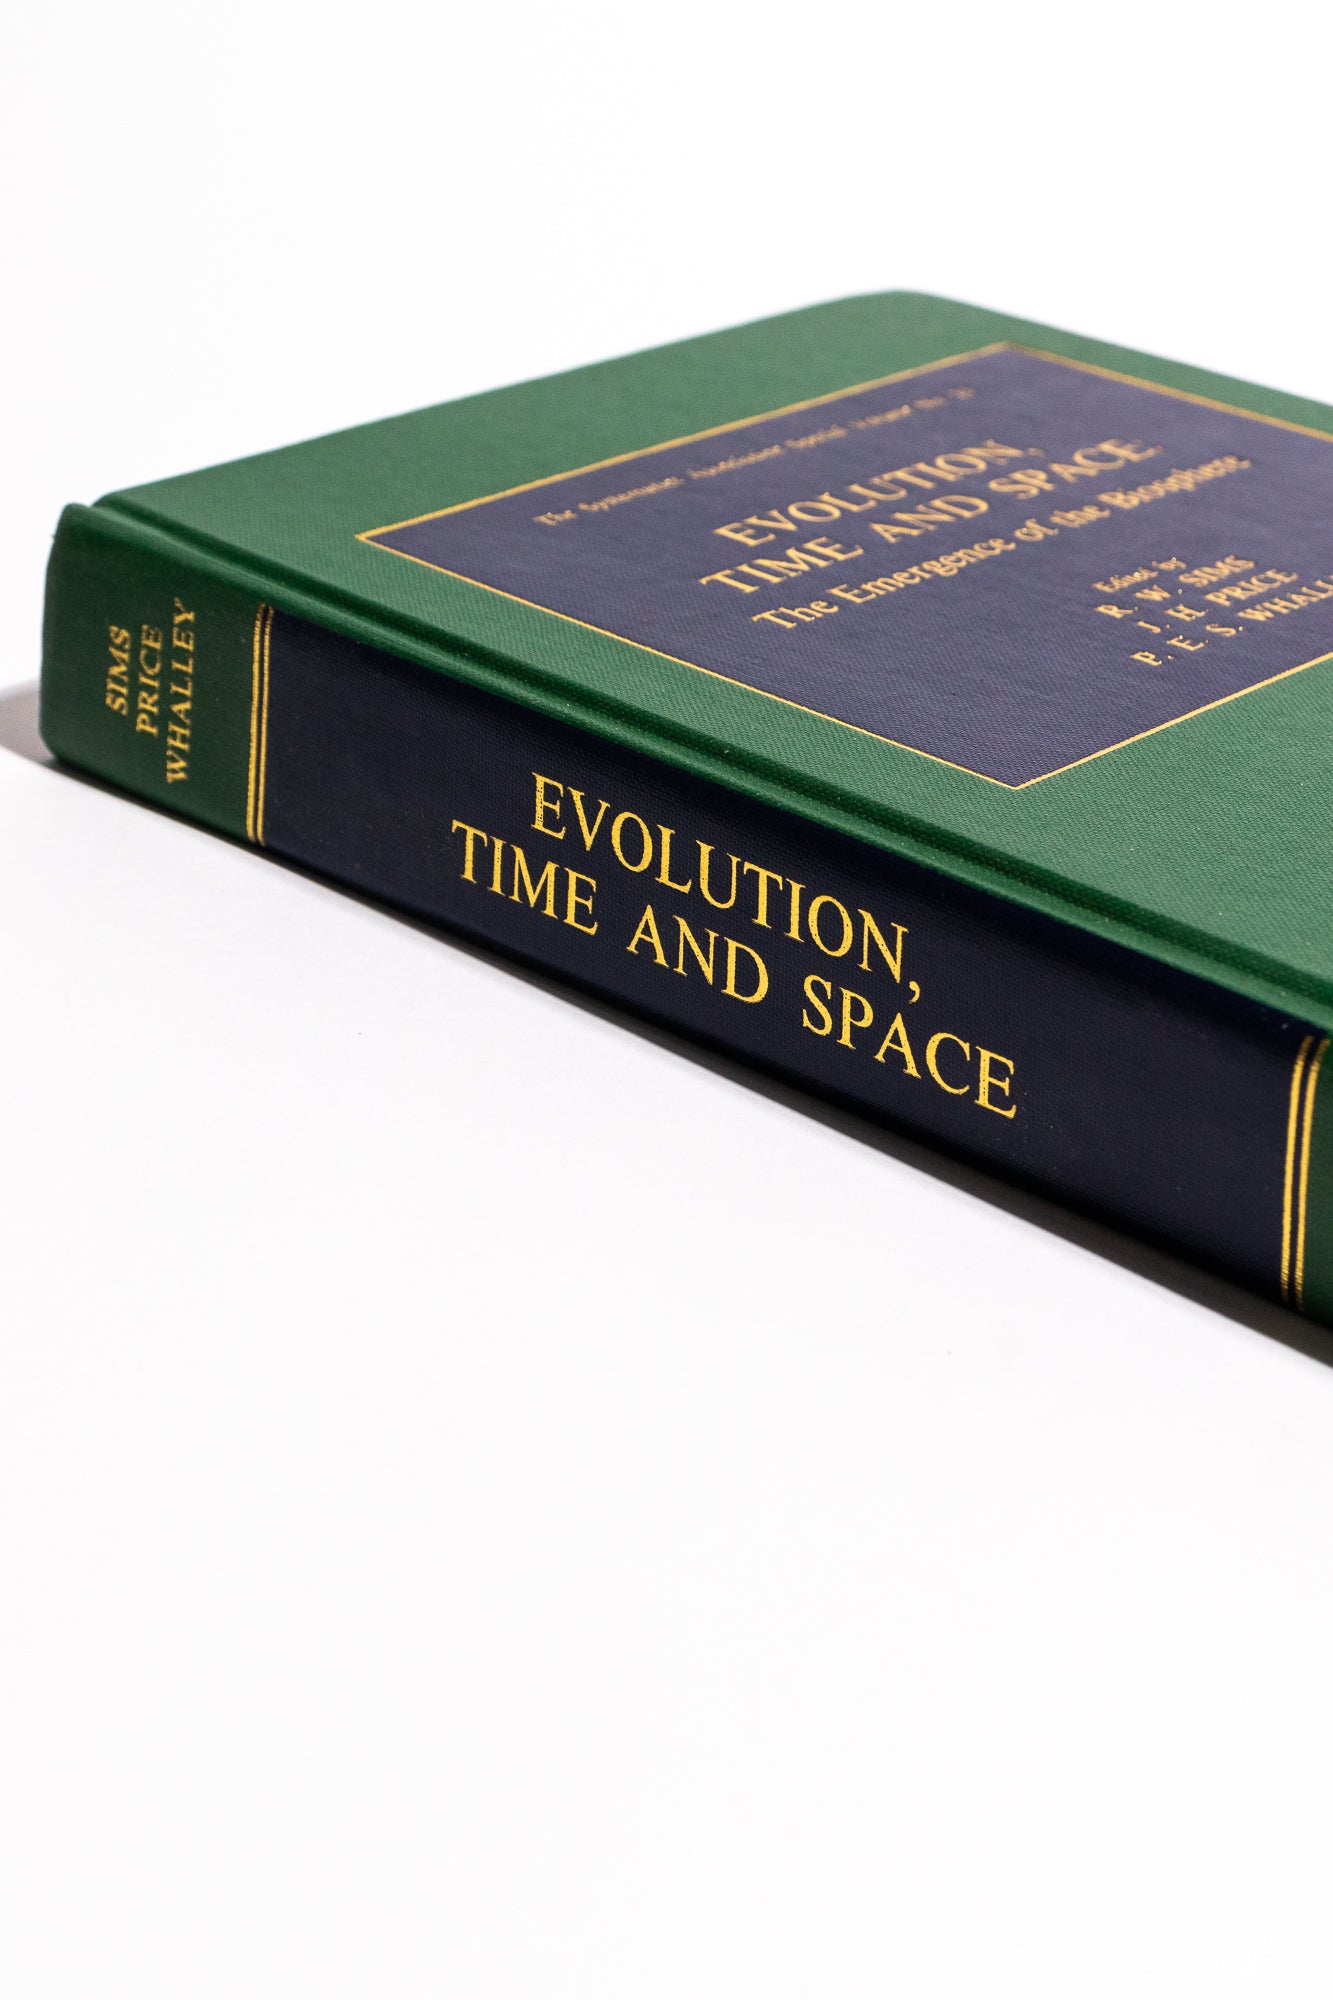 Evolution, Time, and Space: The Emergence of the Biosphere - Stemcell Science Shop